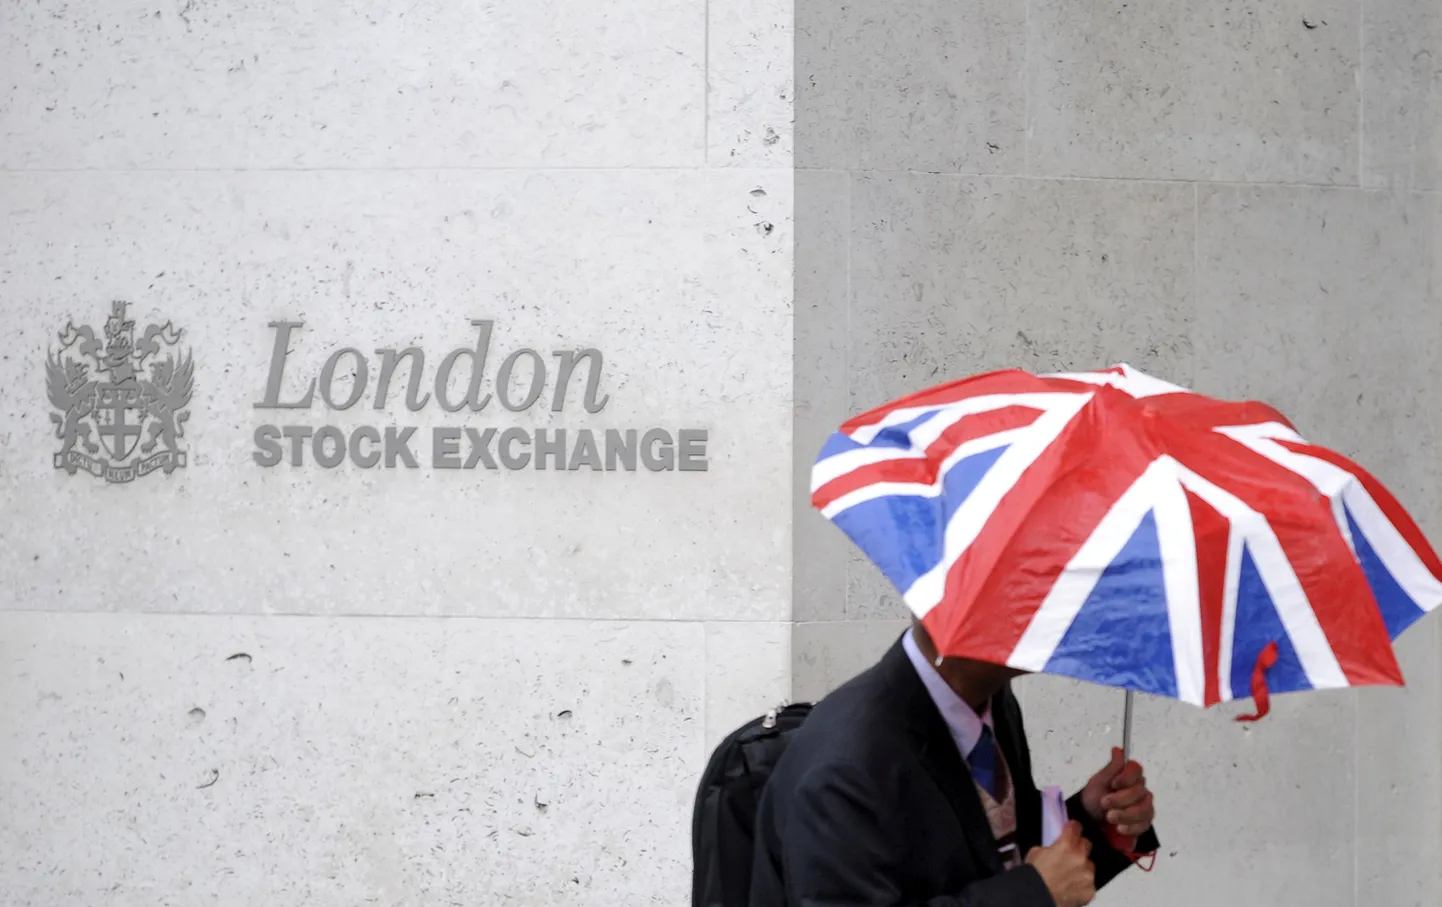 A worker shelters from the rain under a Union Flag umbrella as he passes the London Stock Exchange in London, Britain, October 1, 2008.  REUTERS/Toby Melville/File Photo